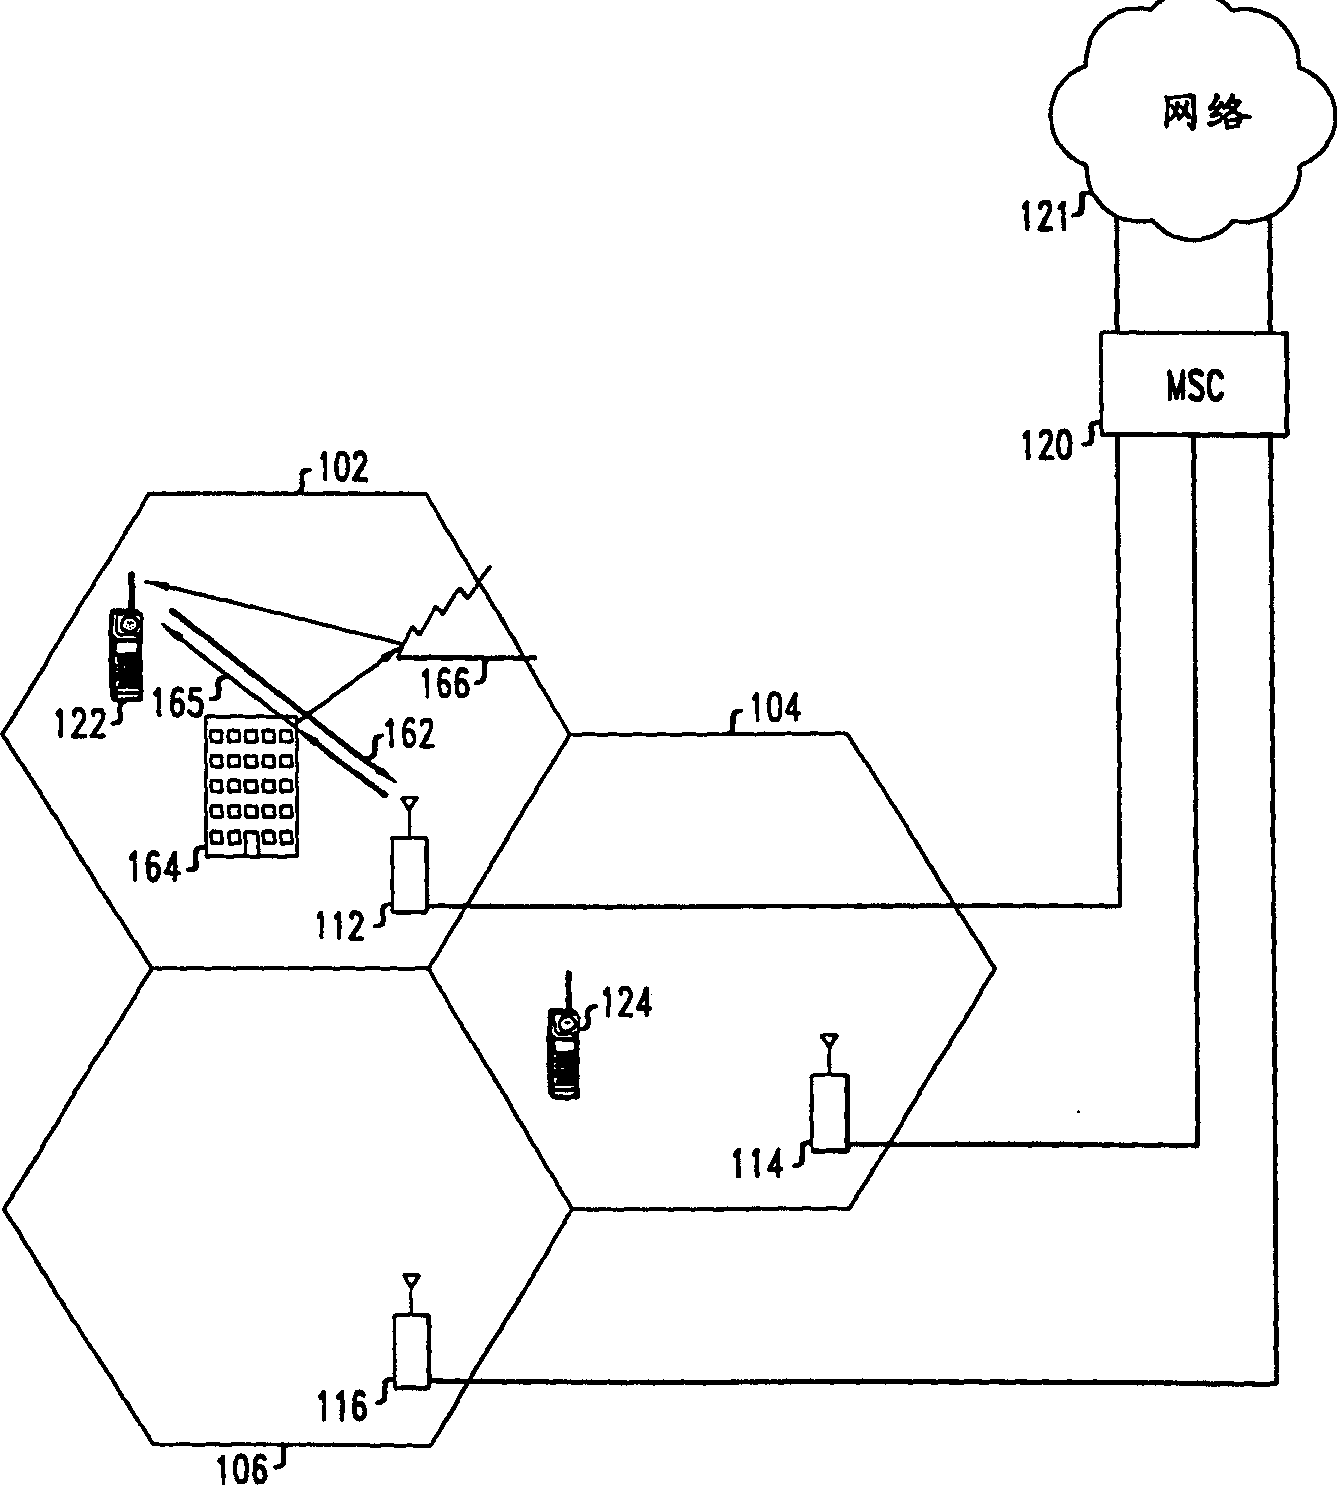 Power amplifier share in wireless communication system with transmitting diversity